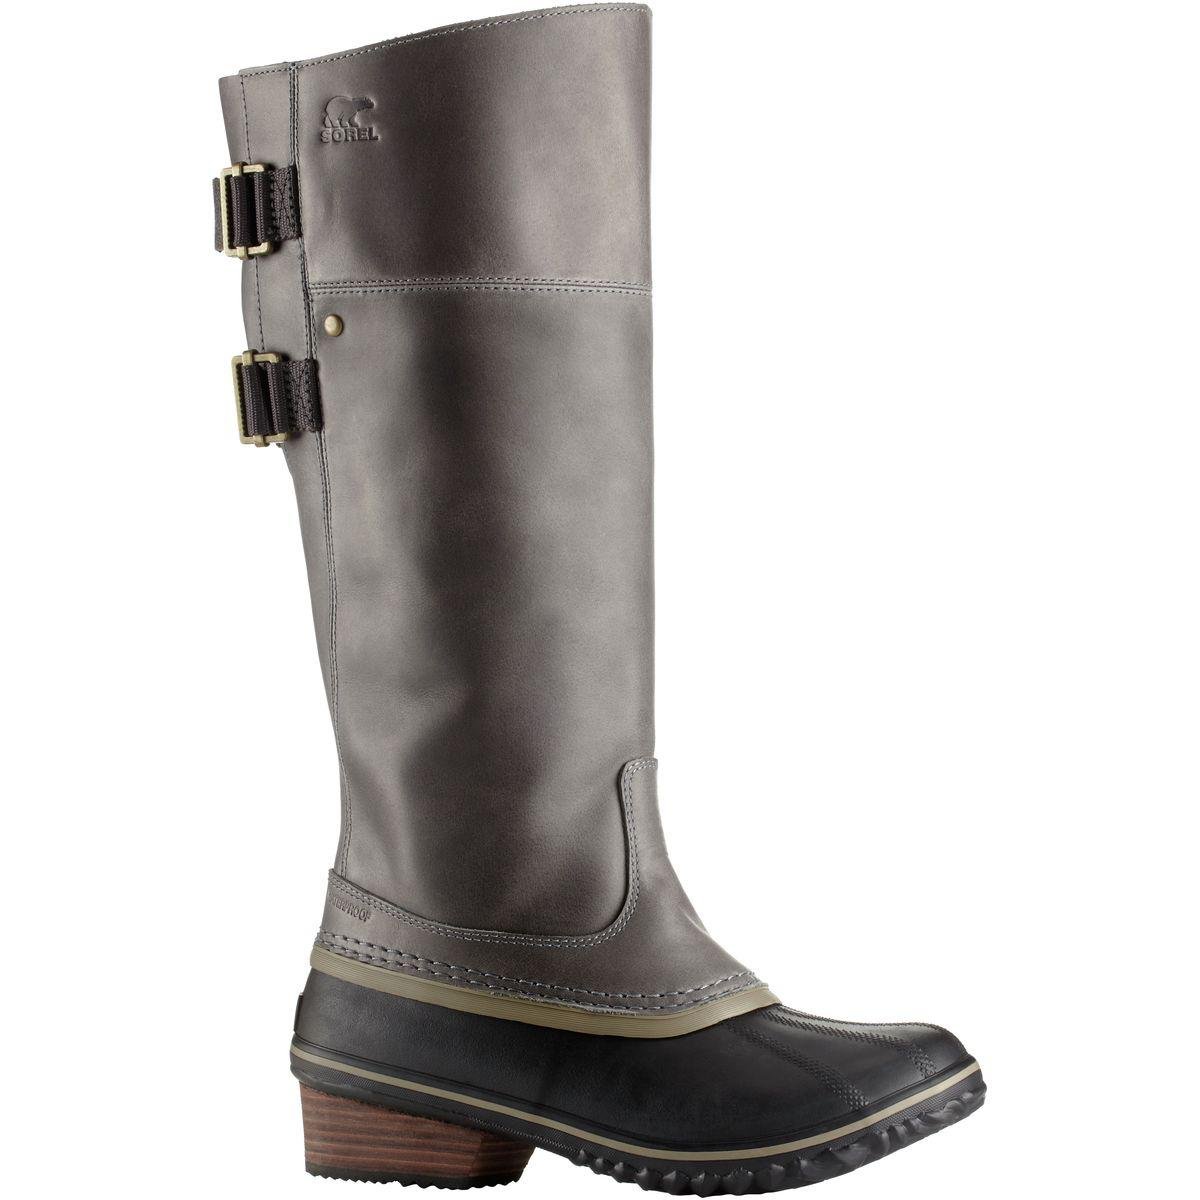 Sorel Leather Slimpack Riding Tall Boot in Gray - Lyst